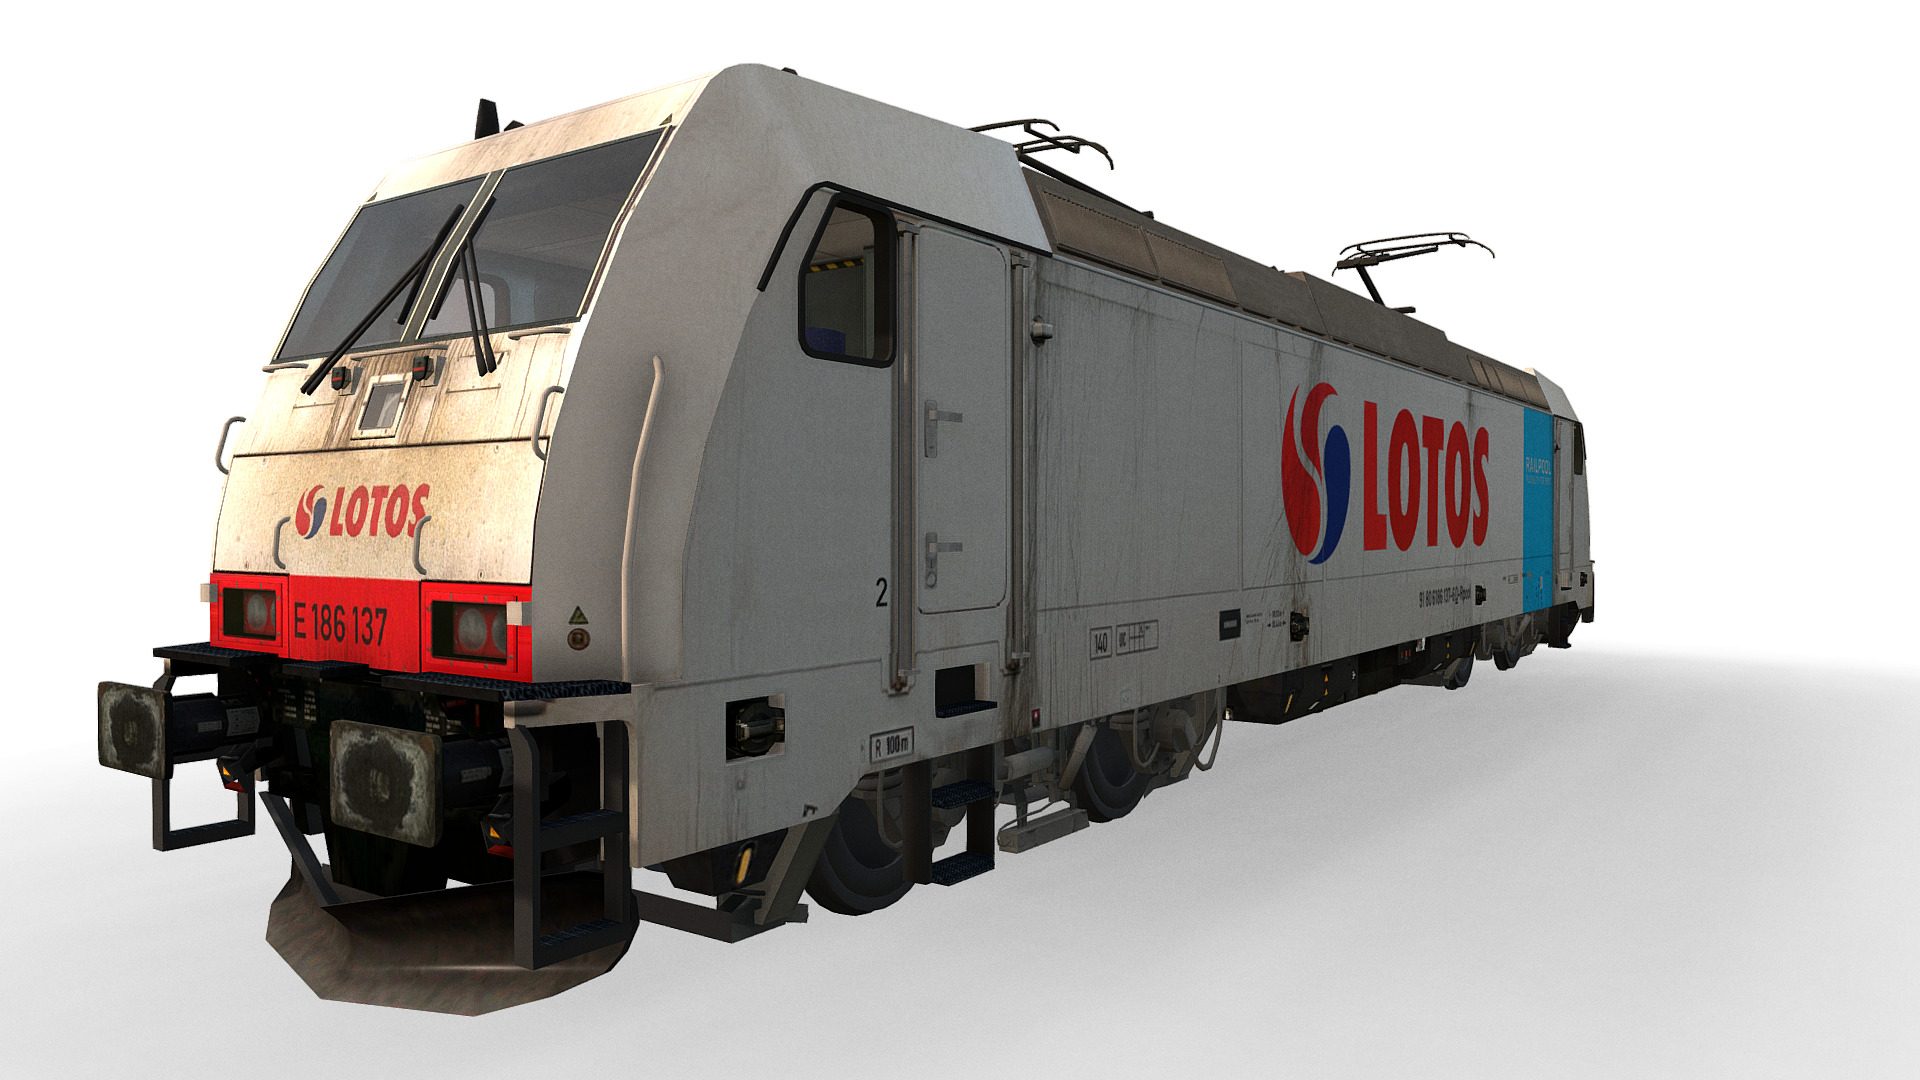 3D model Locomotive Class 186 137-6 – RailPool / Lotos - This is a 3D model of the Locomotive Class 186 137-6 - RailPool / Lotos. The 3D model is about a white and blue train.